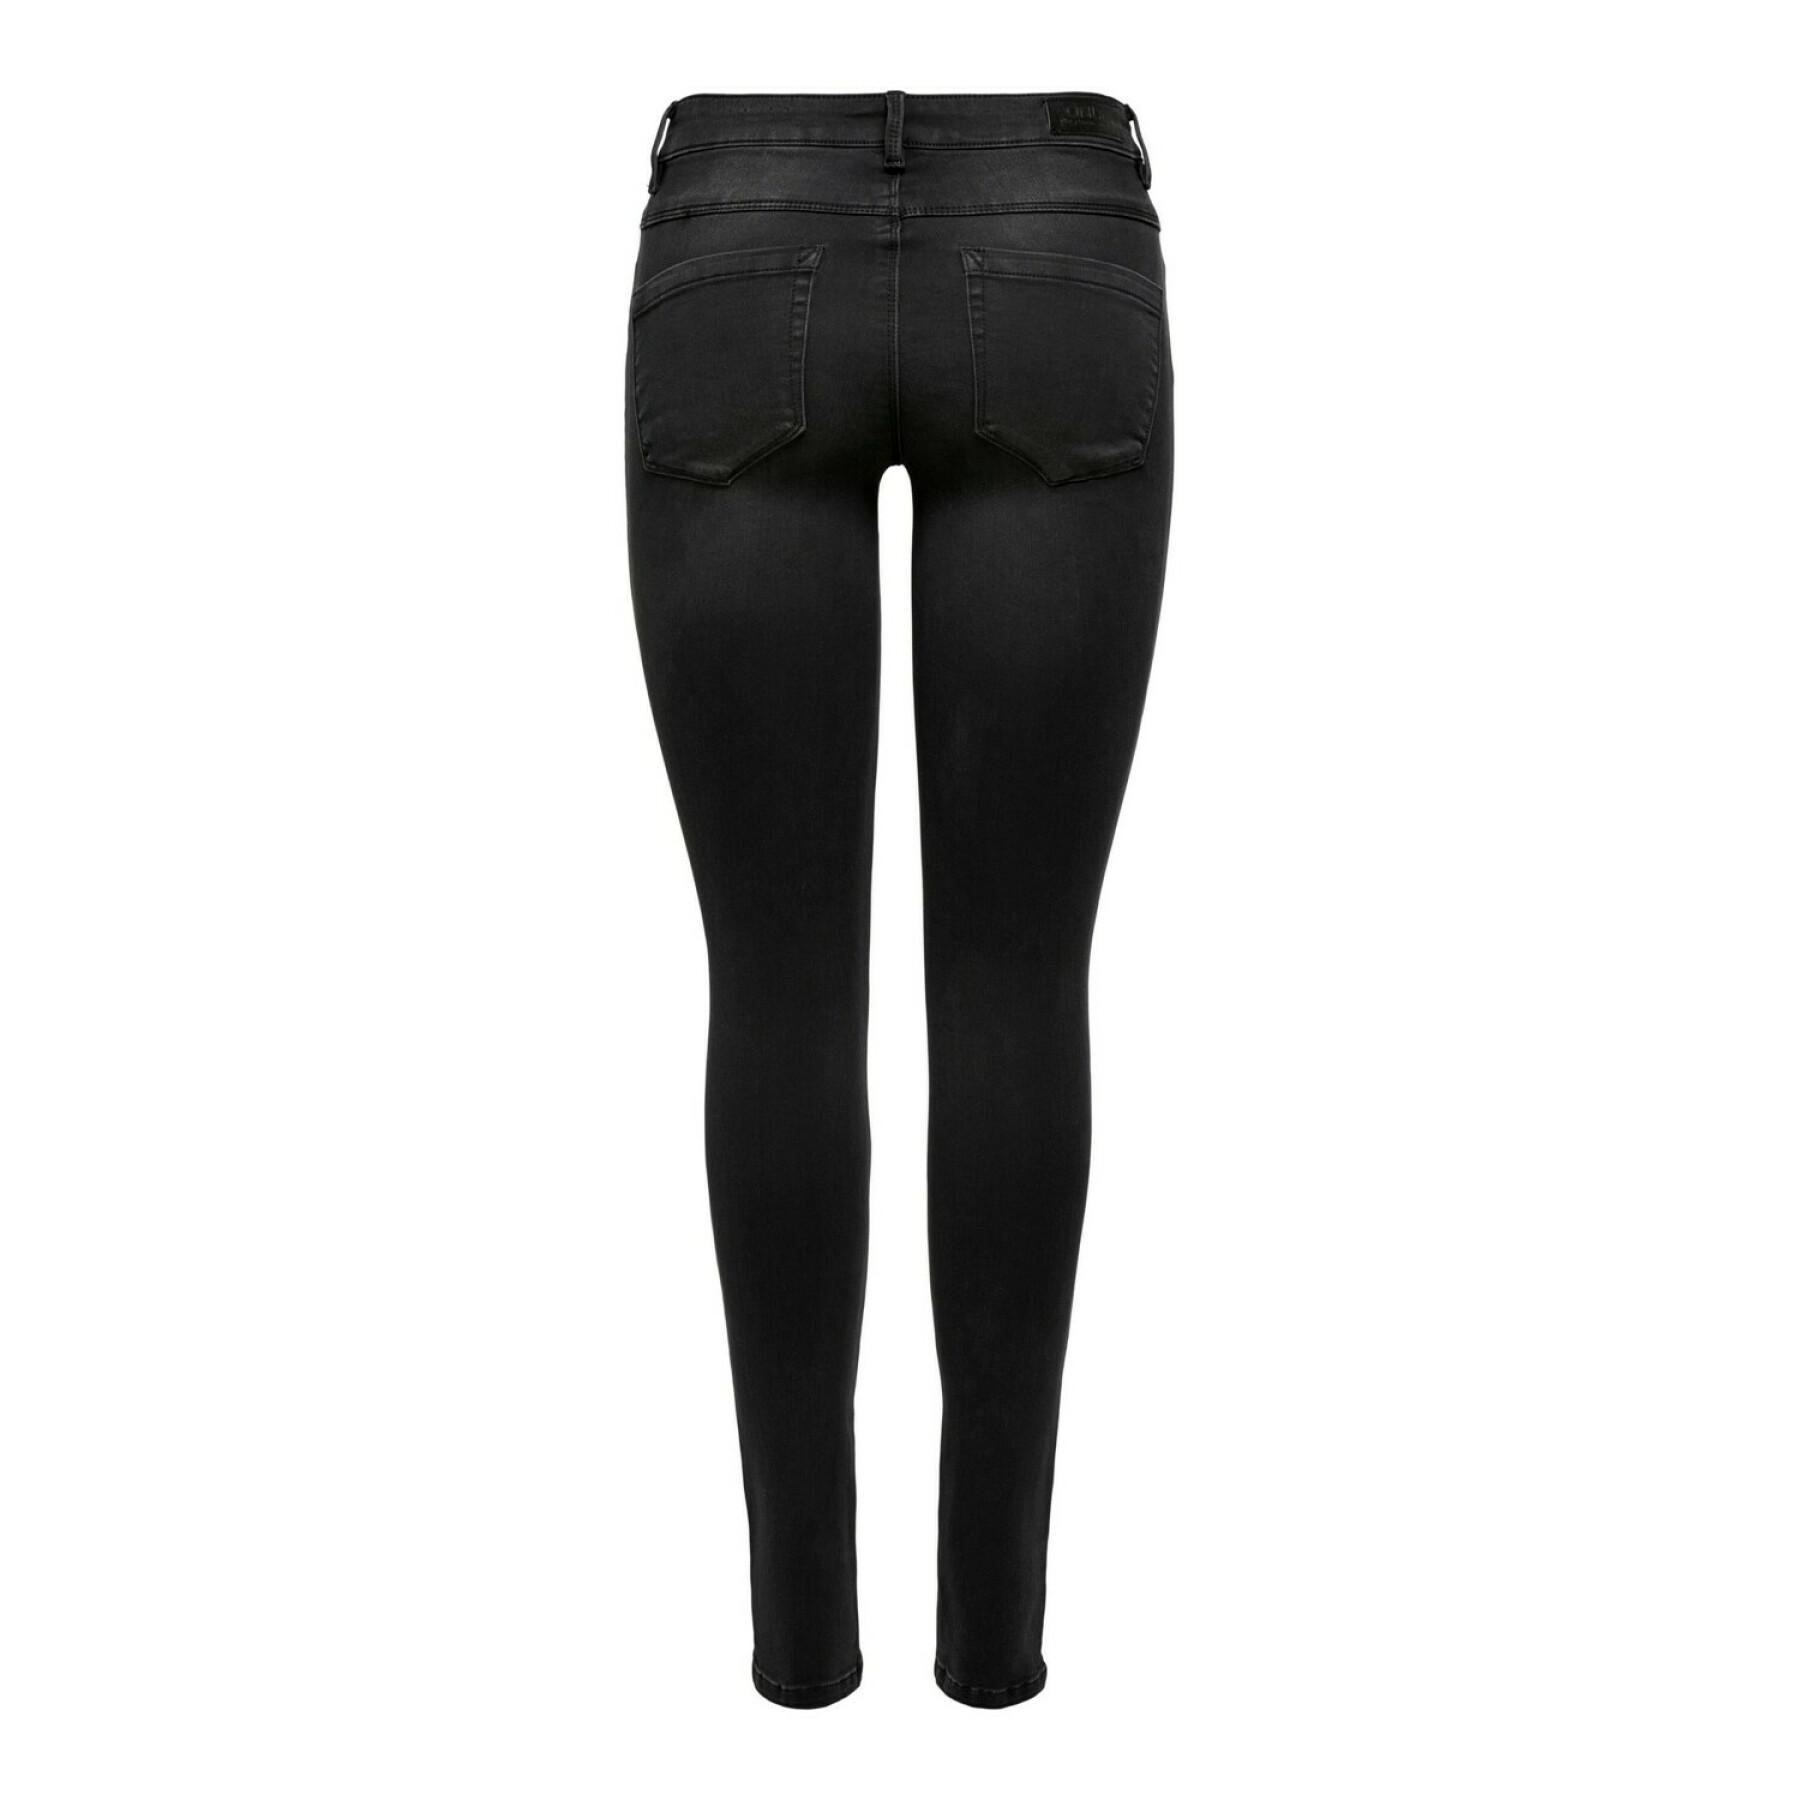 Women's jeans Only Onlroyal life